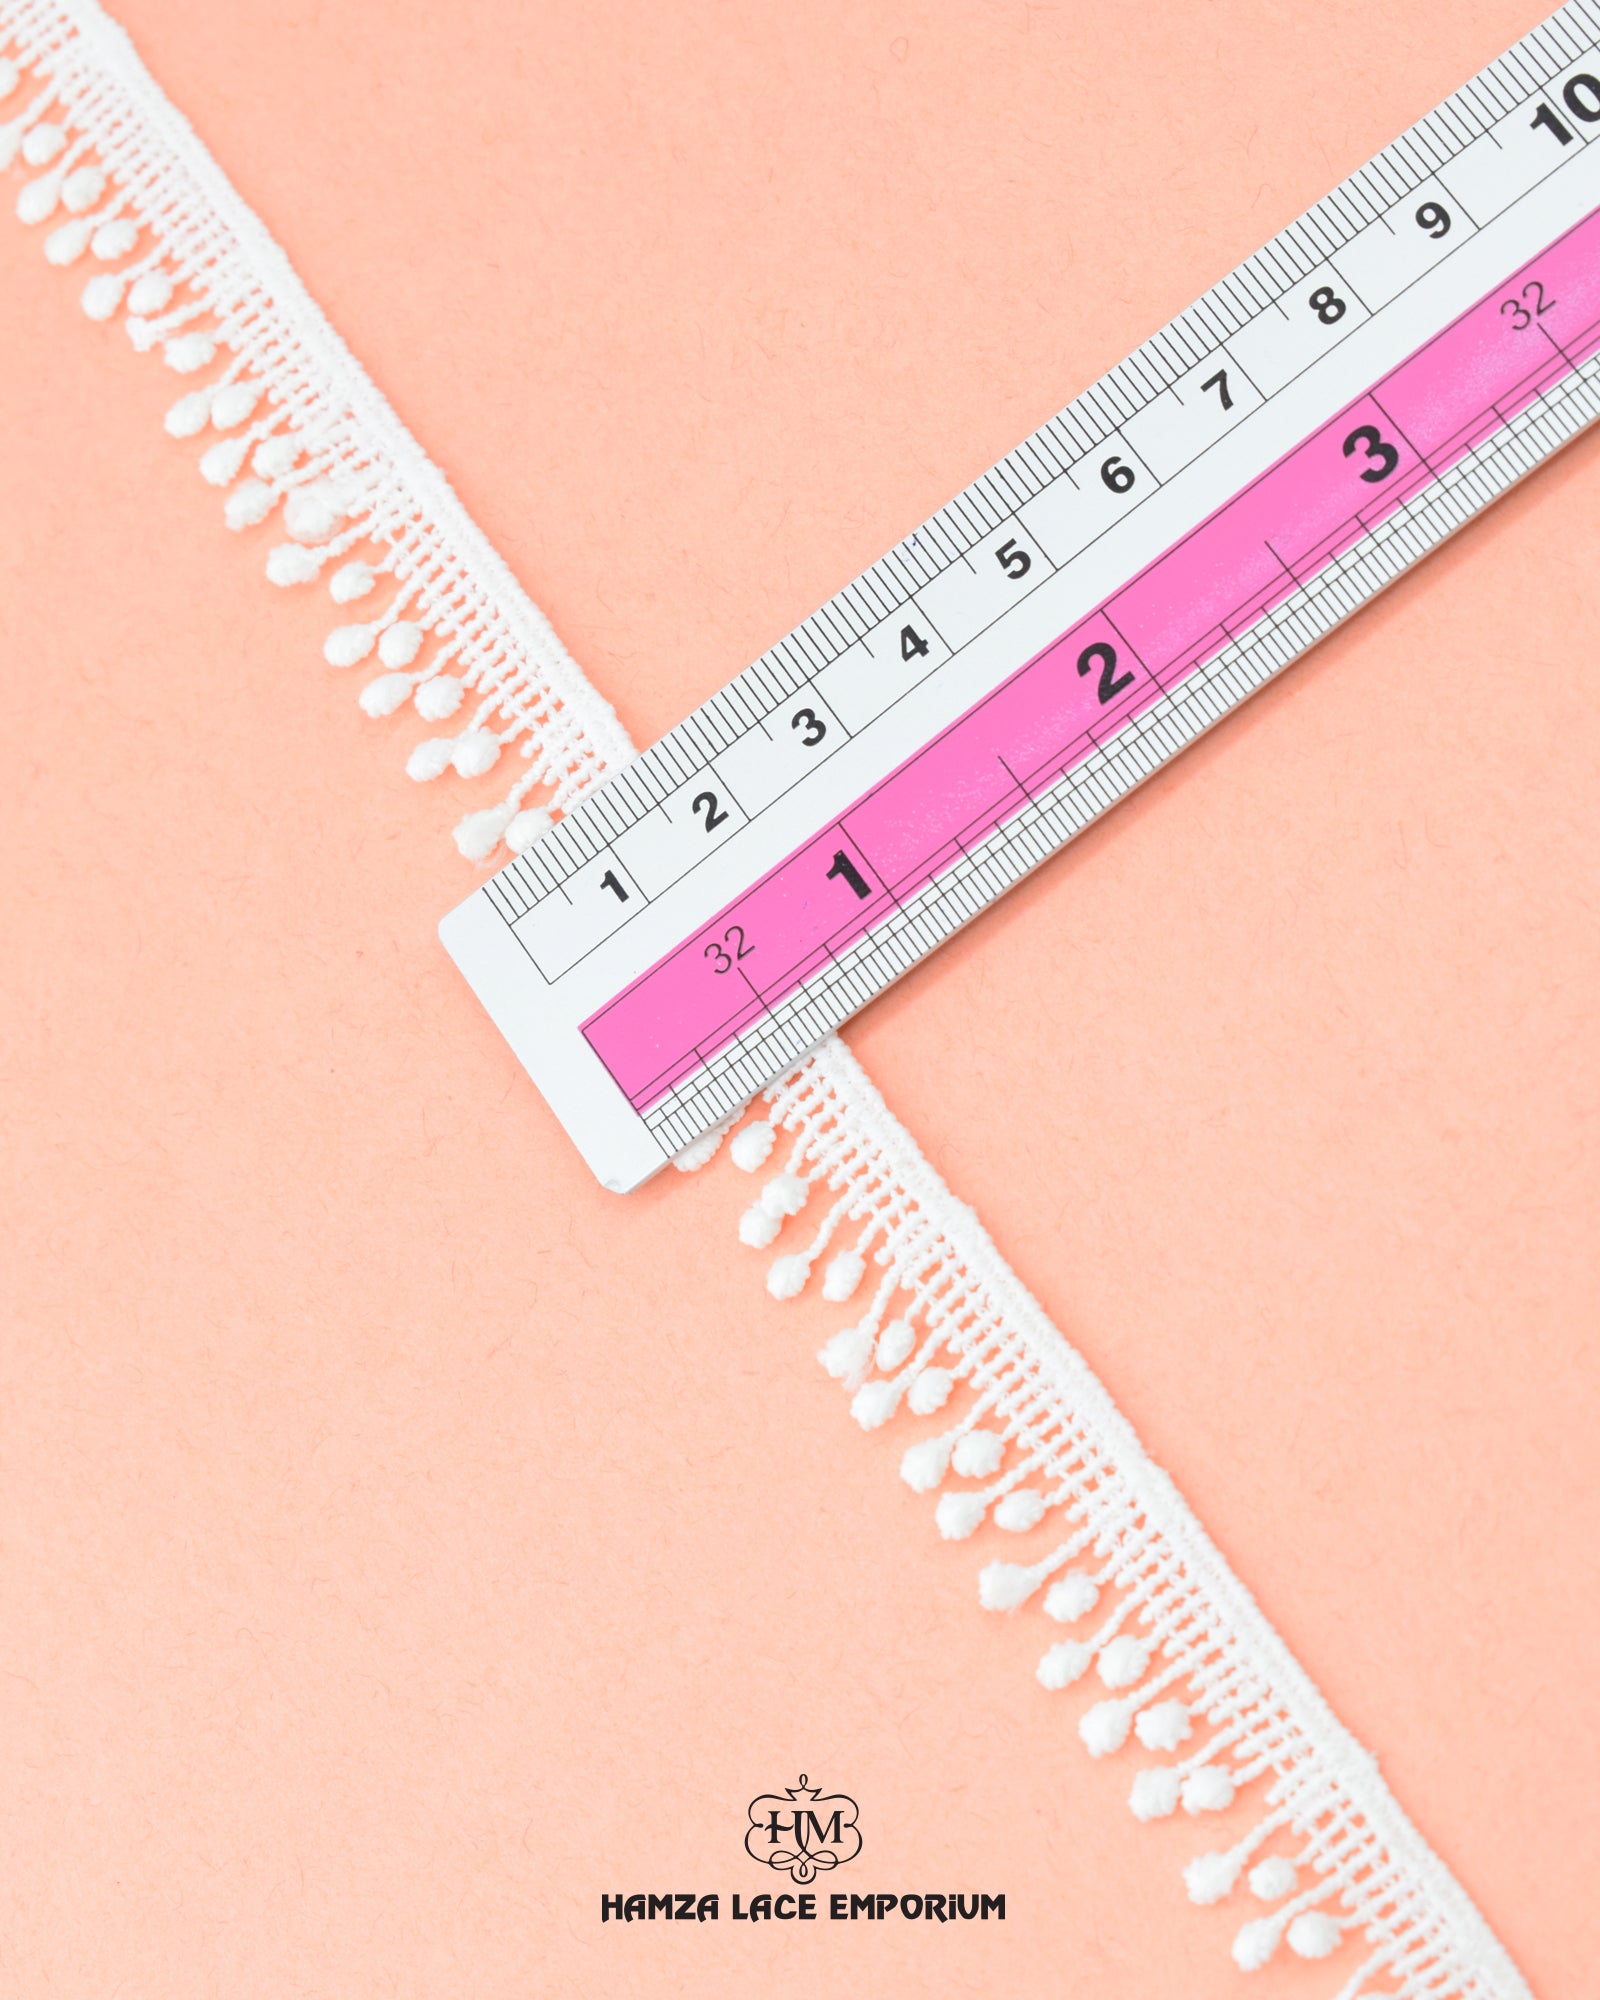 Size of the 'Edging Lace 22395' is shown as '0.75' inches with the help of a ruler